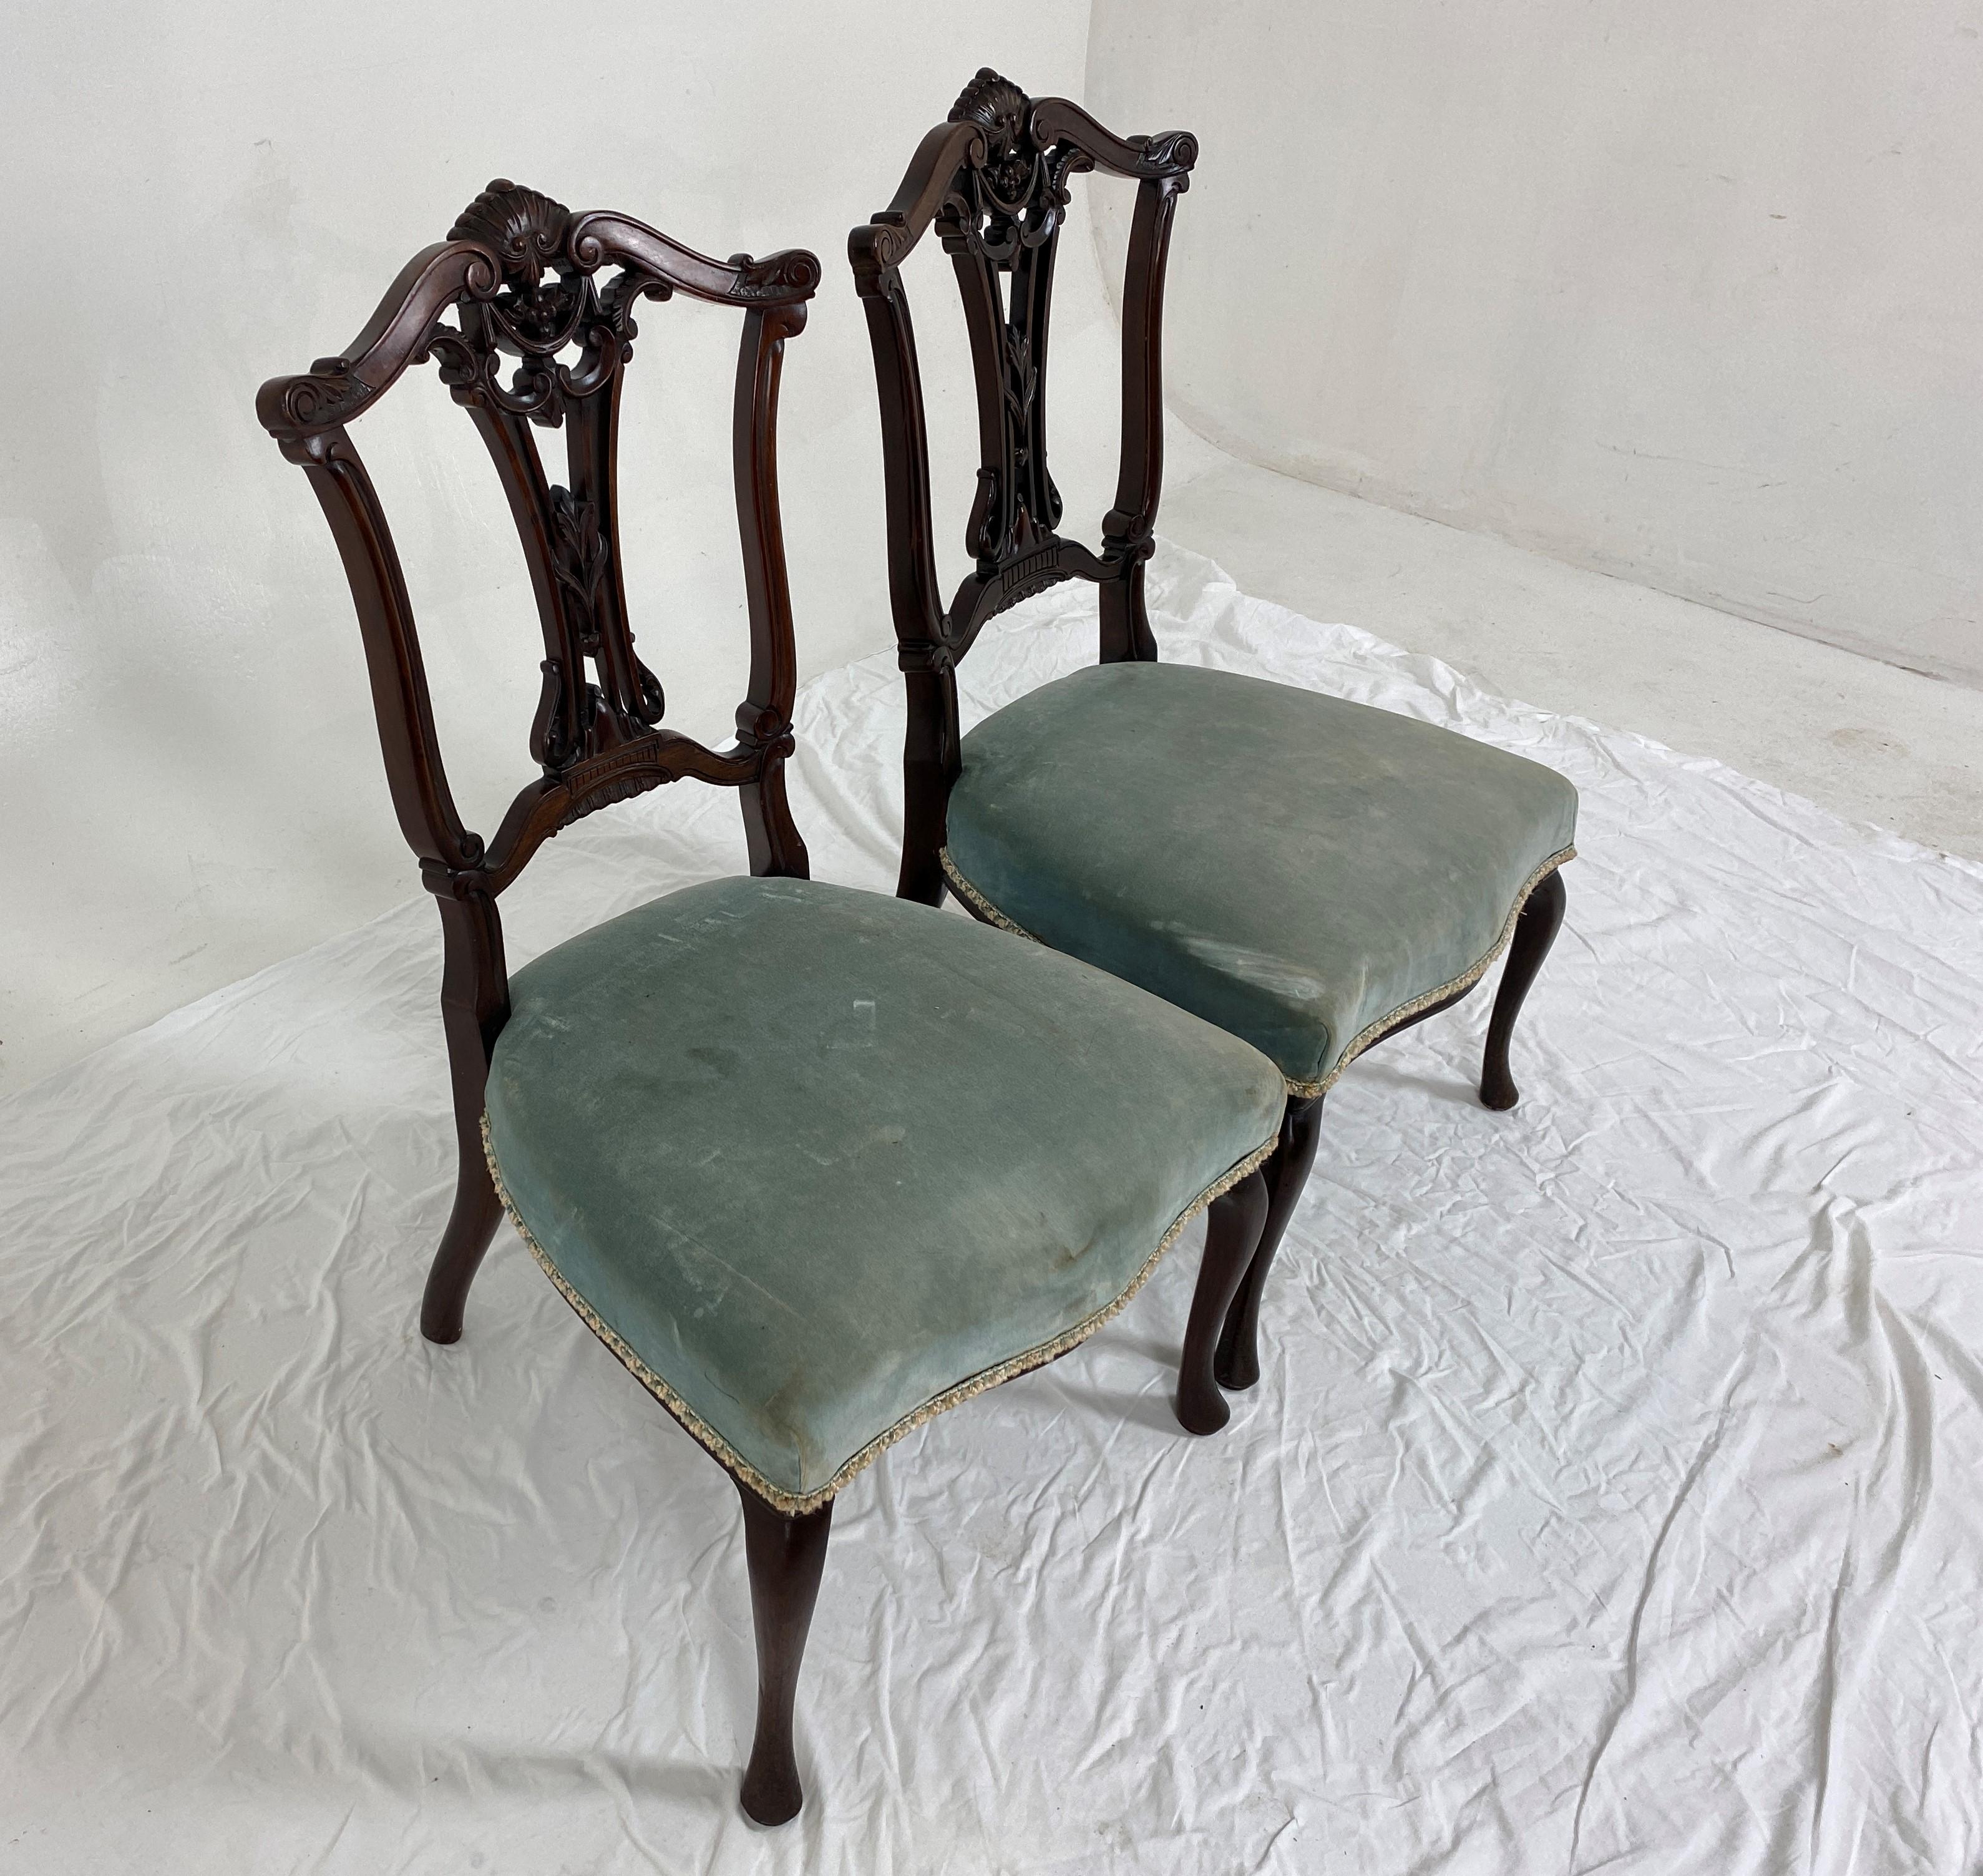 Pair Victorian carved walnut nursing chair upholstered seat, Scotland 1890, H766.

Scotland 1890
Solid Walnut
Original Finish
Shaped Carved open back
Upholstered seat with a light green color fabric
All standing on short cabriole legs
All